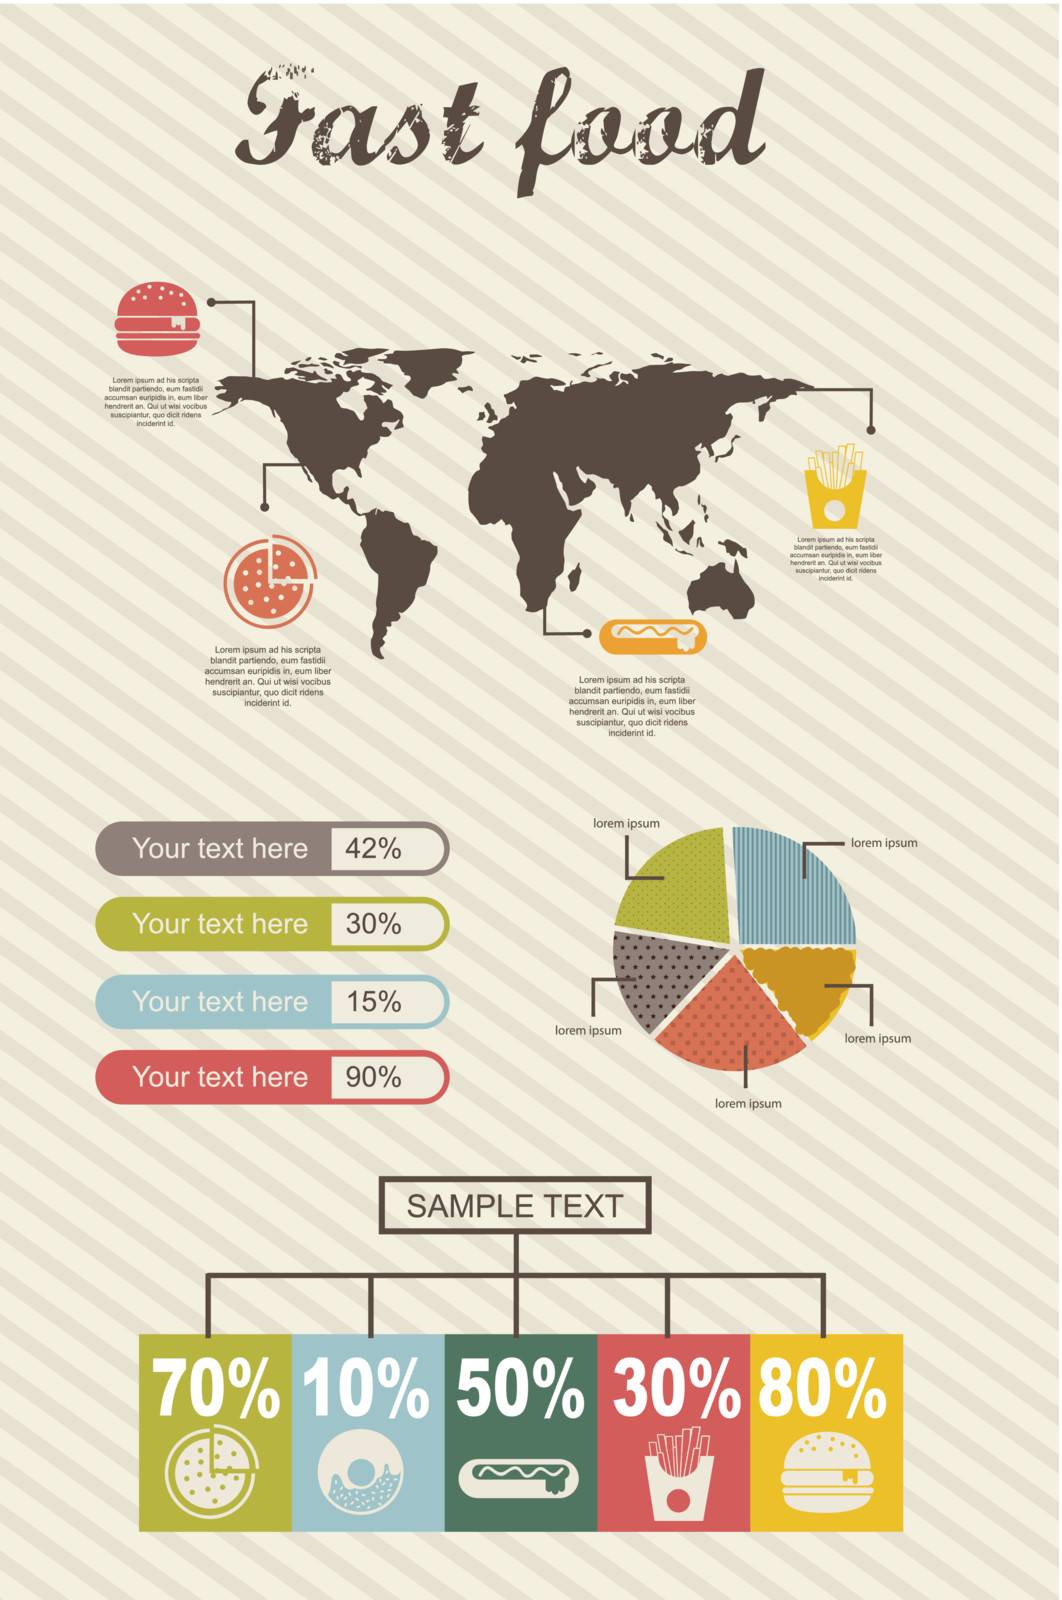 infographics of fast food, vintage style. vector illustration